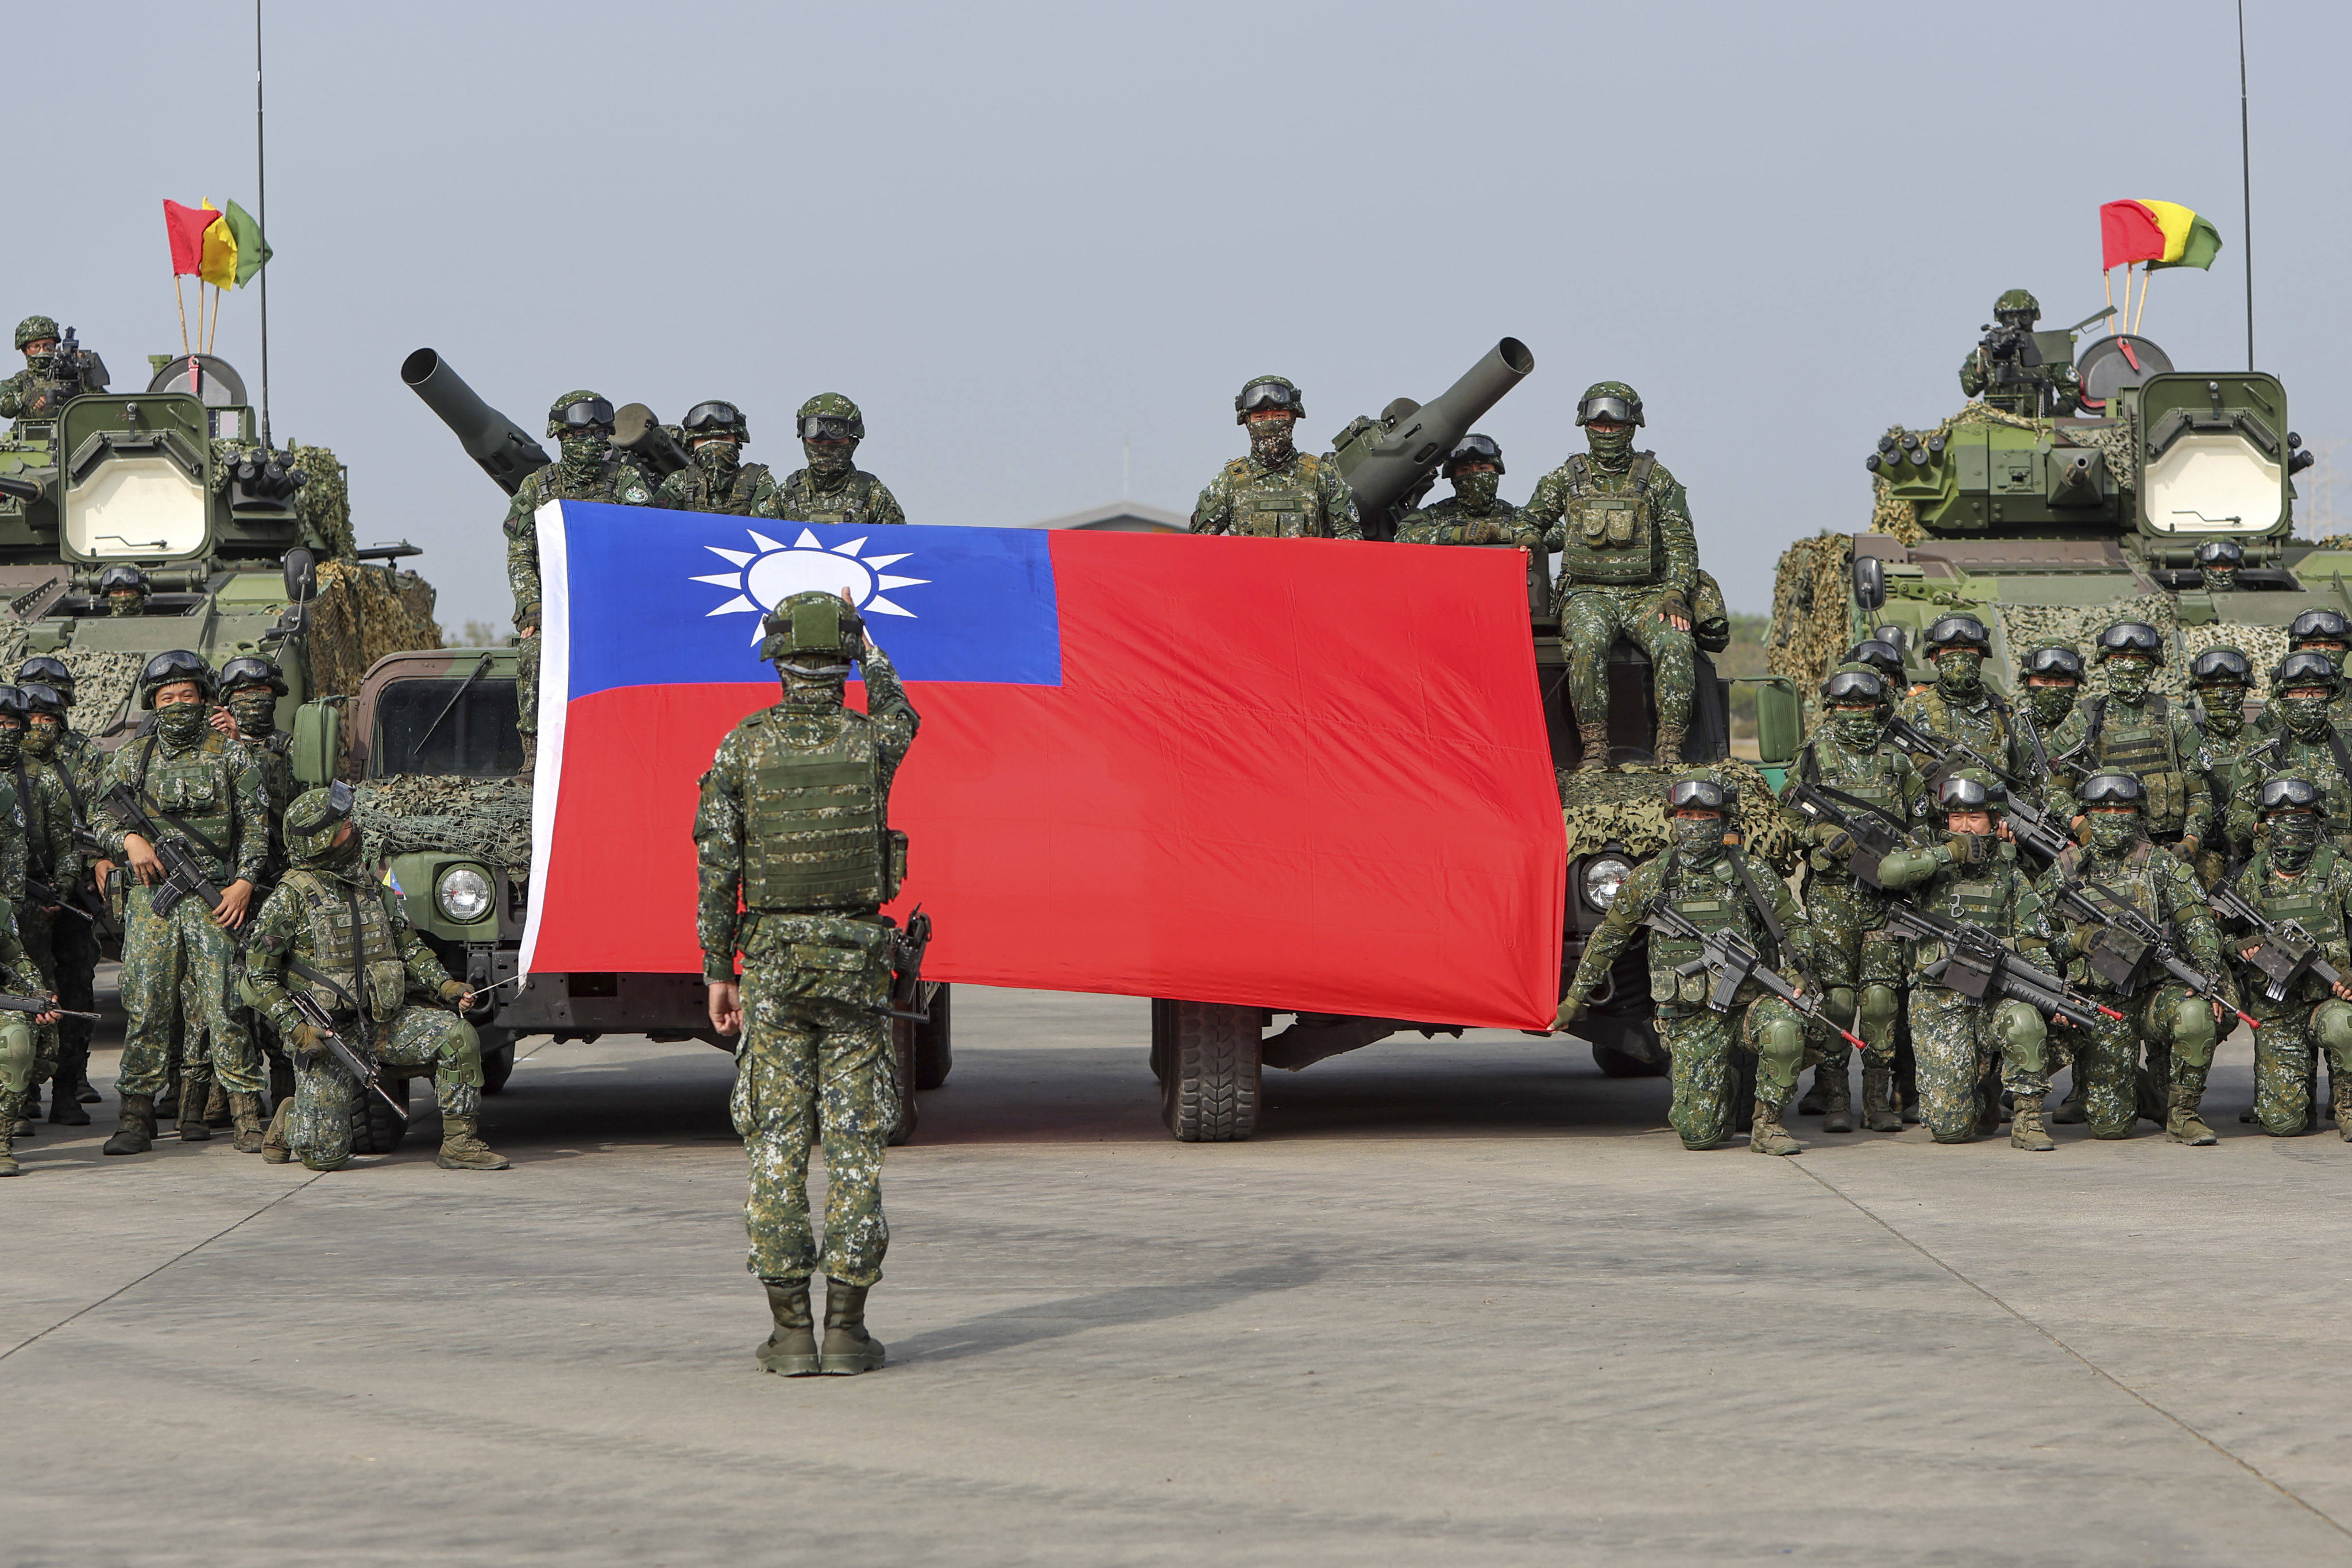 The Economist Intelligence Unit (EIU) evaluated risks in the case of a conflict over Taiwan with the mainland Chinese military and participation by the United States. Photo: AP